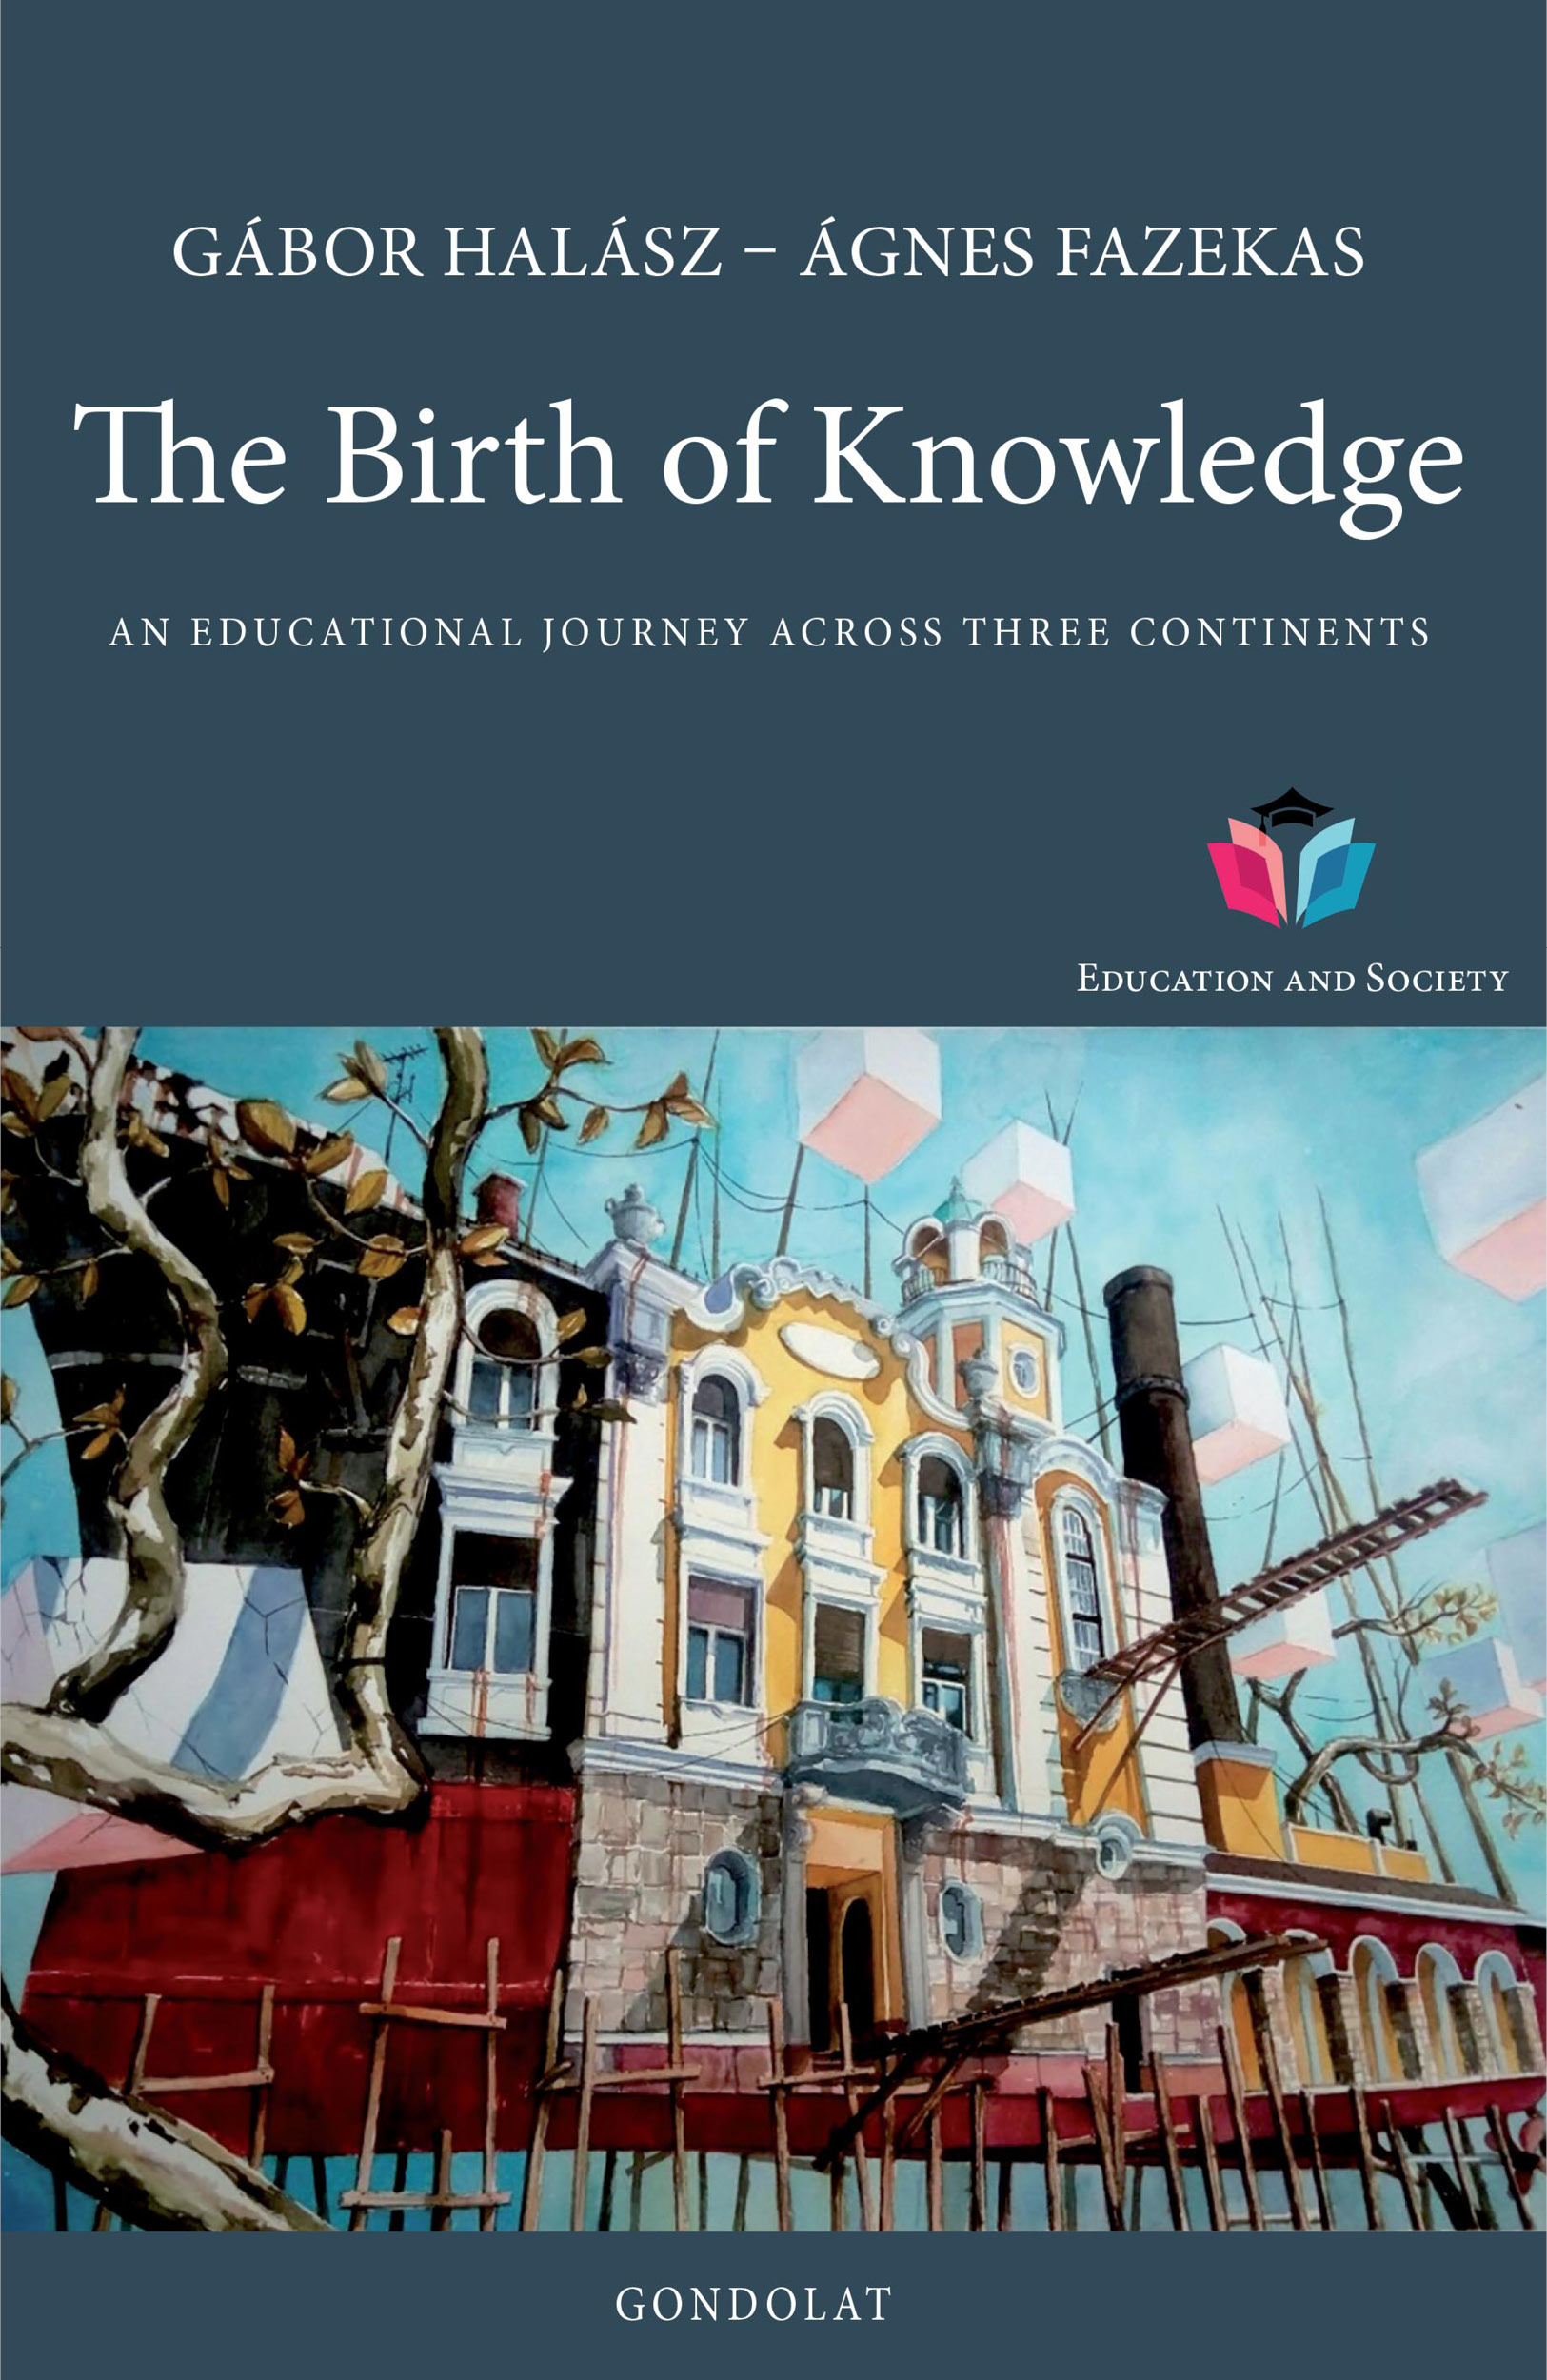 The Birth of Knowledge. An educational journey across three continents